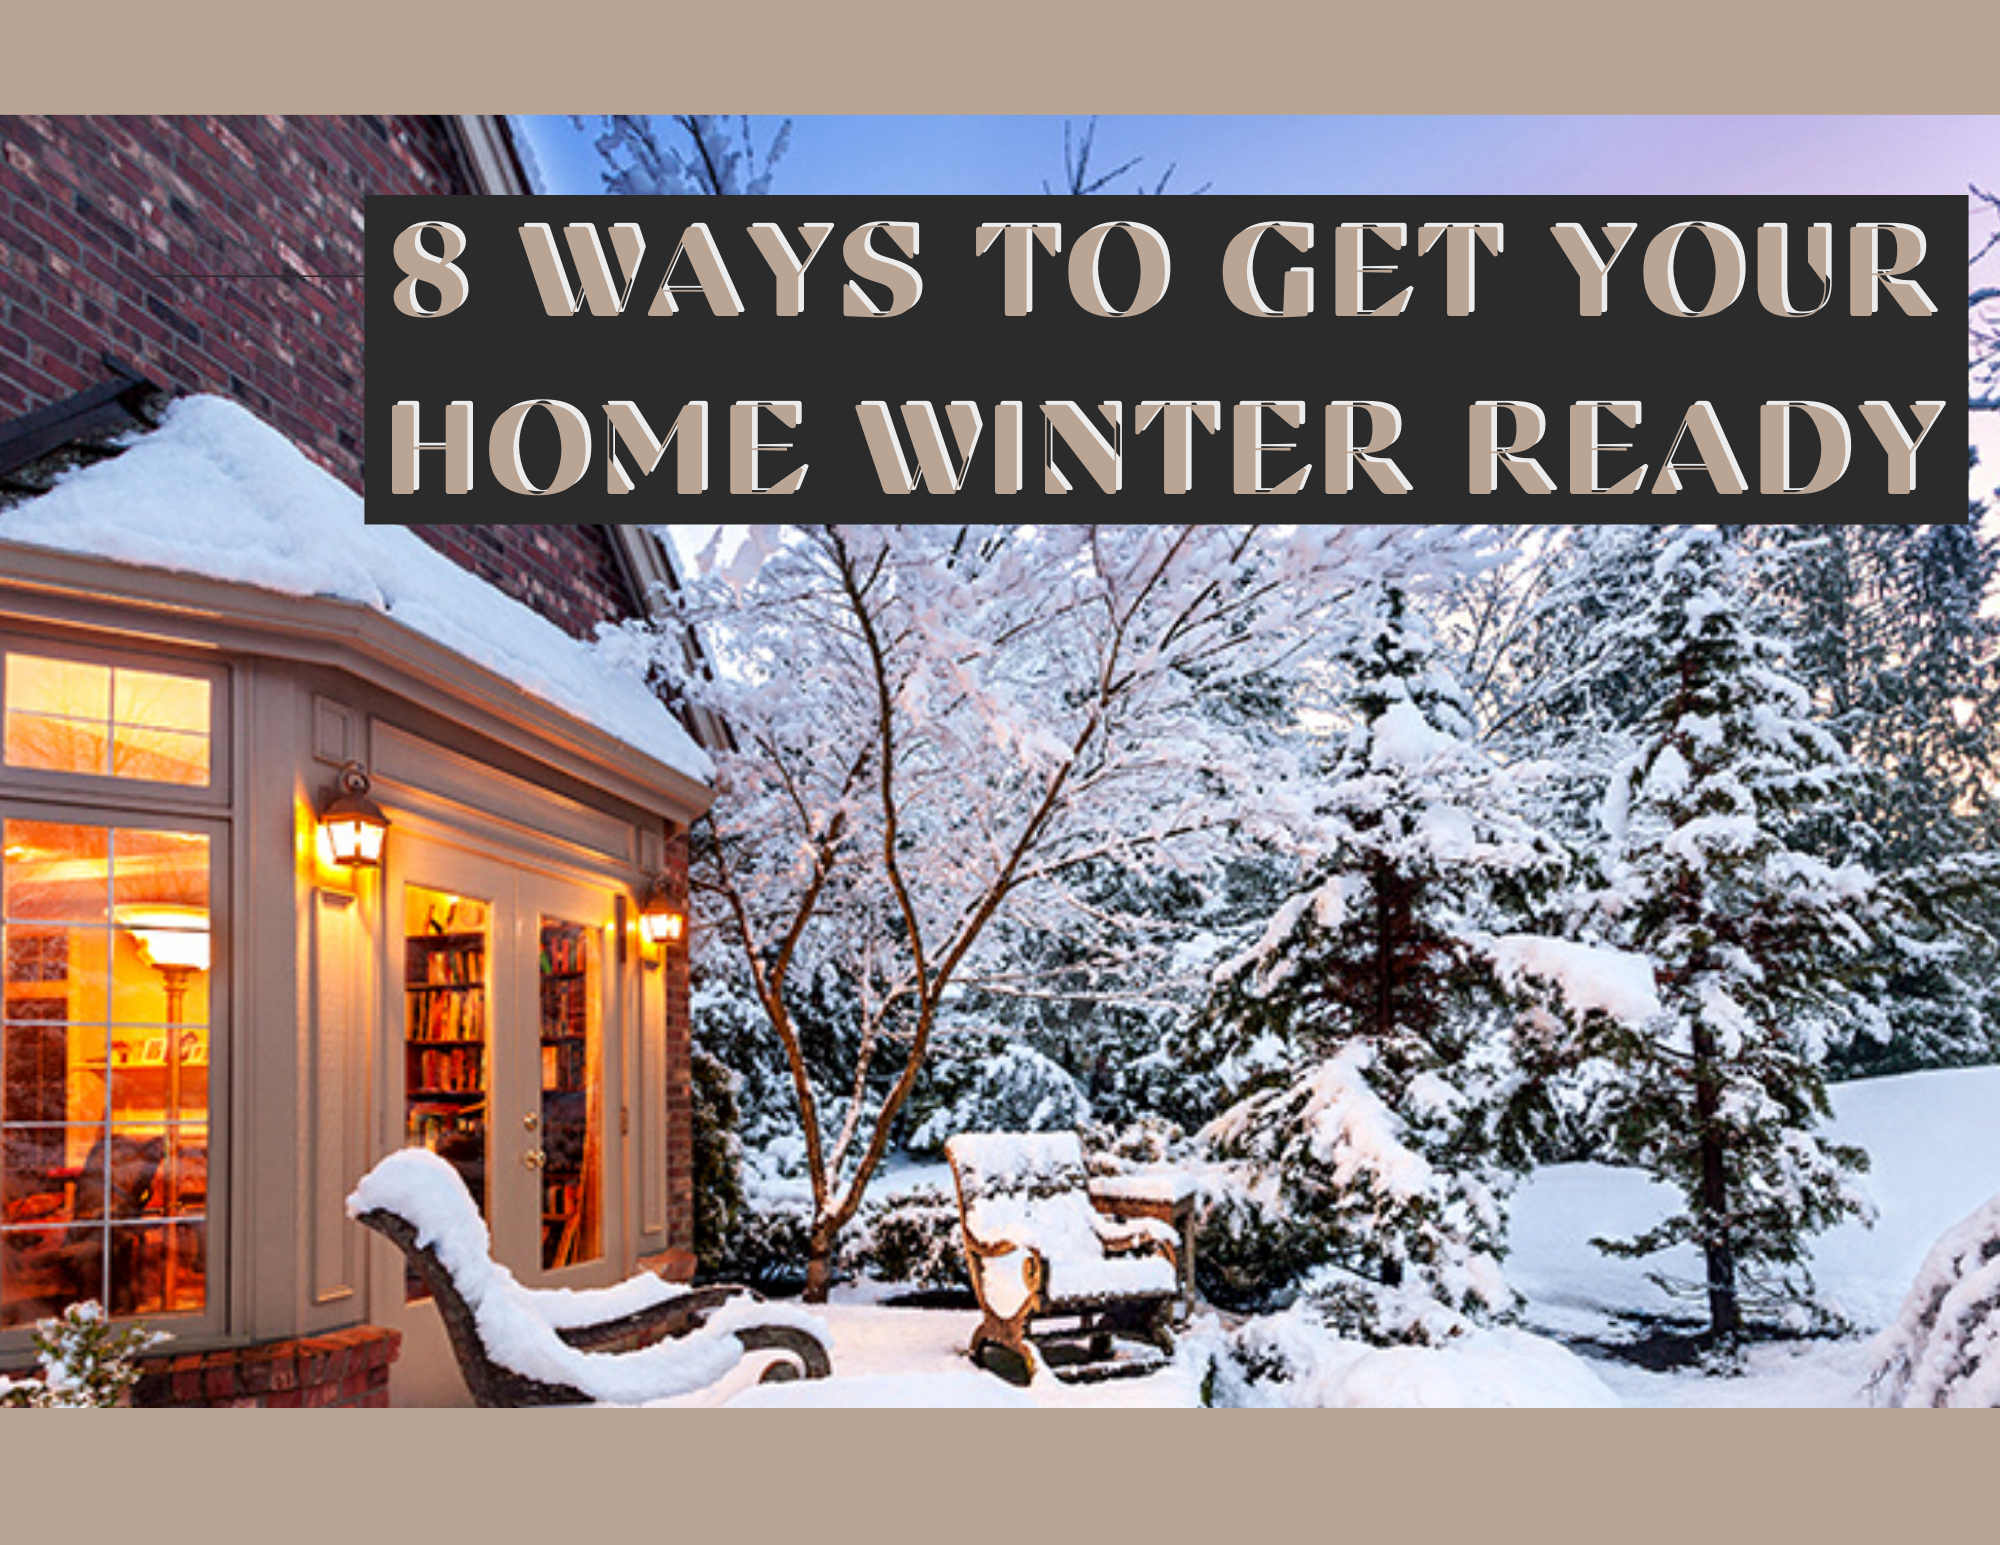 8 Ways To Winterize Your Home Stat!